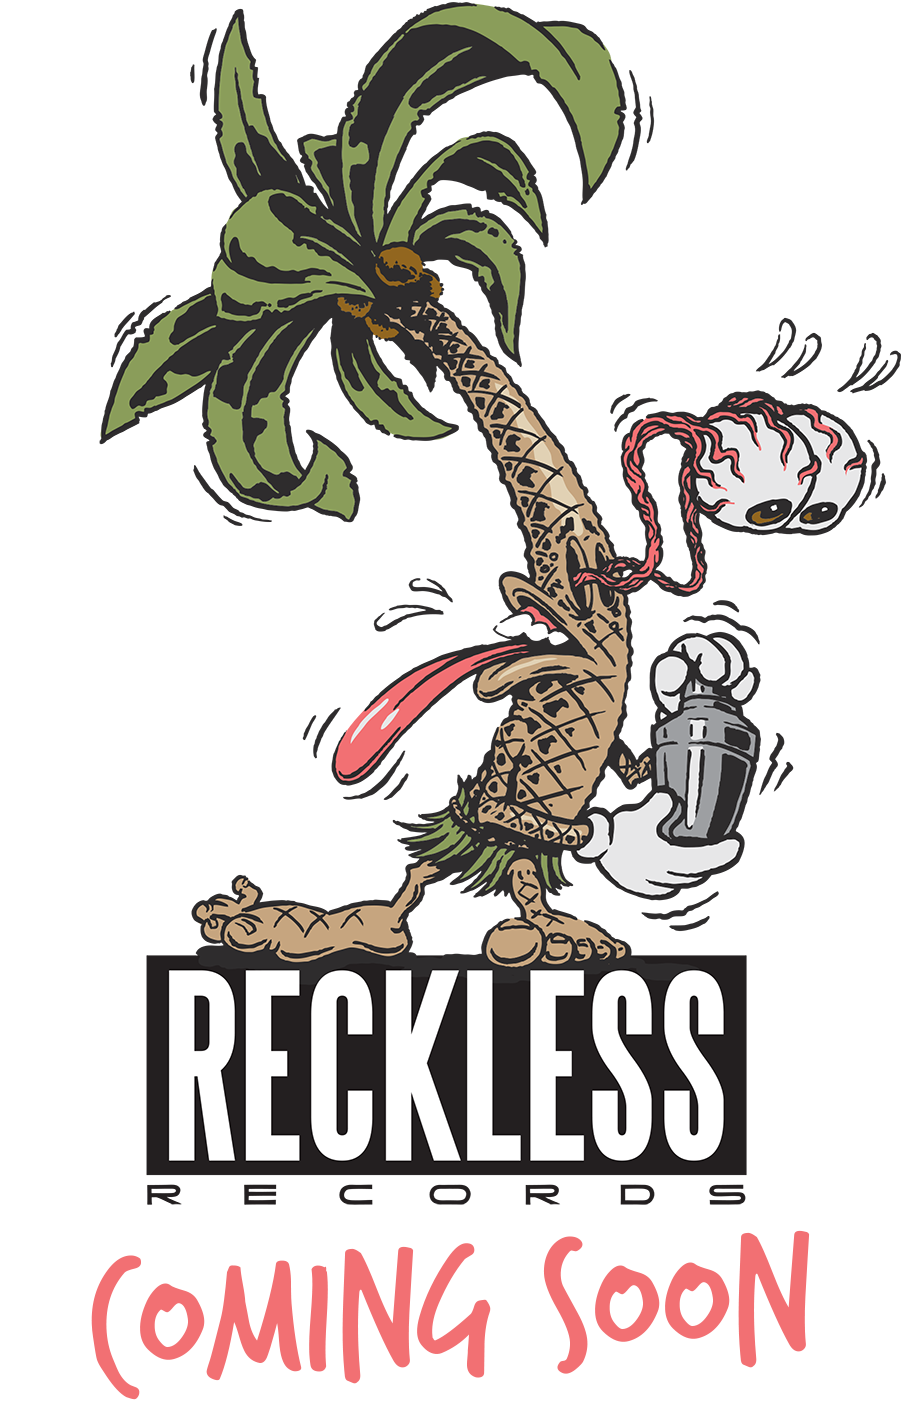 Reckless Records Logo